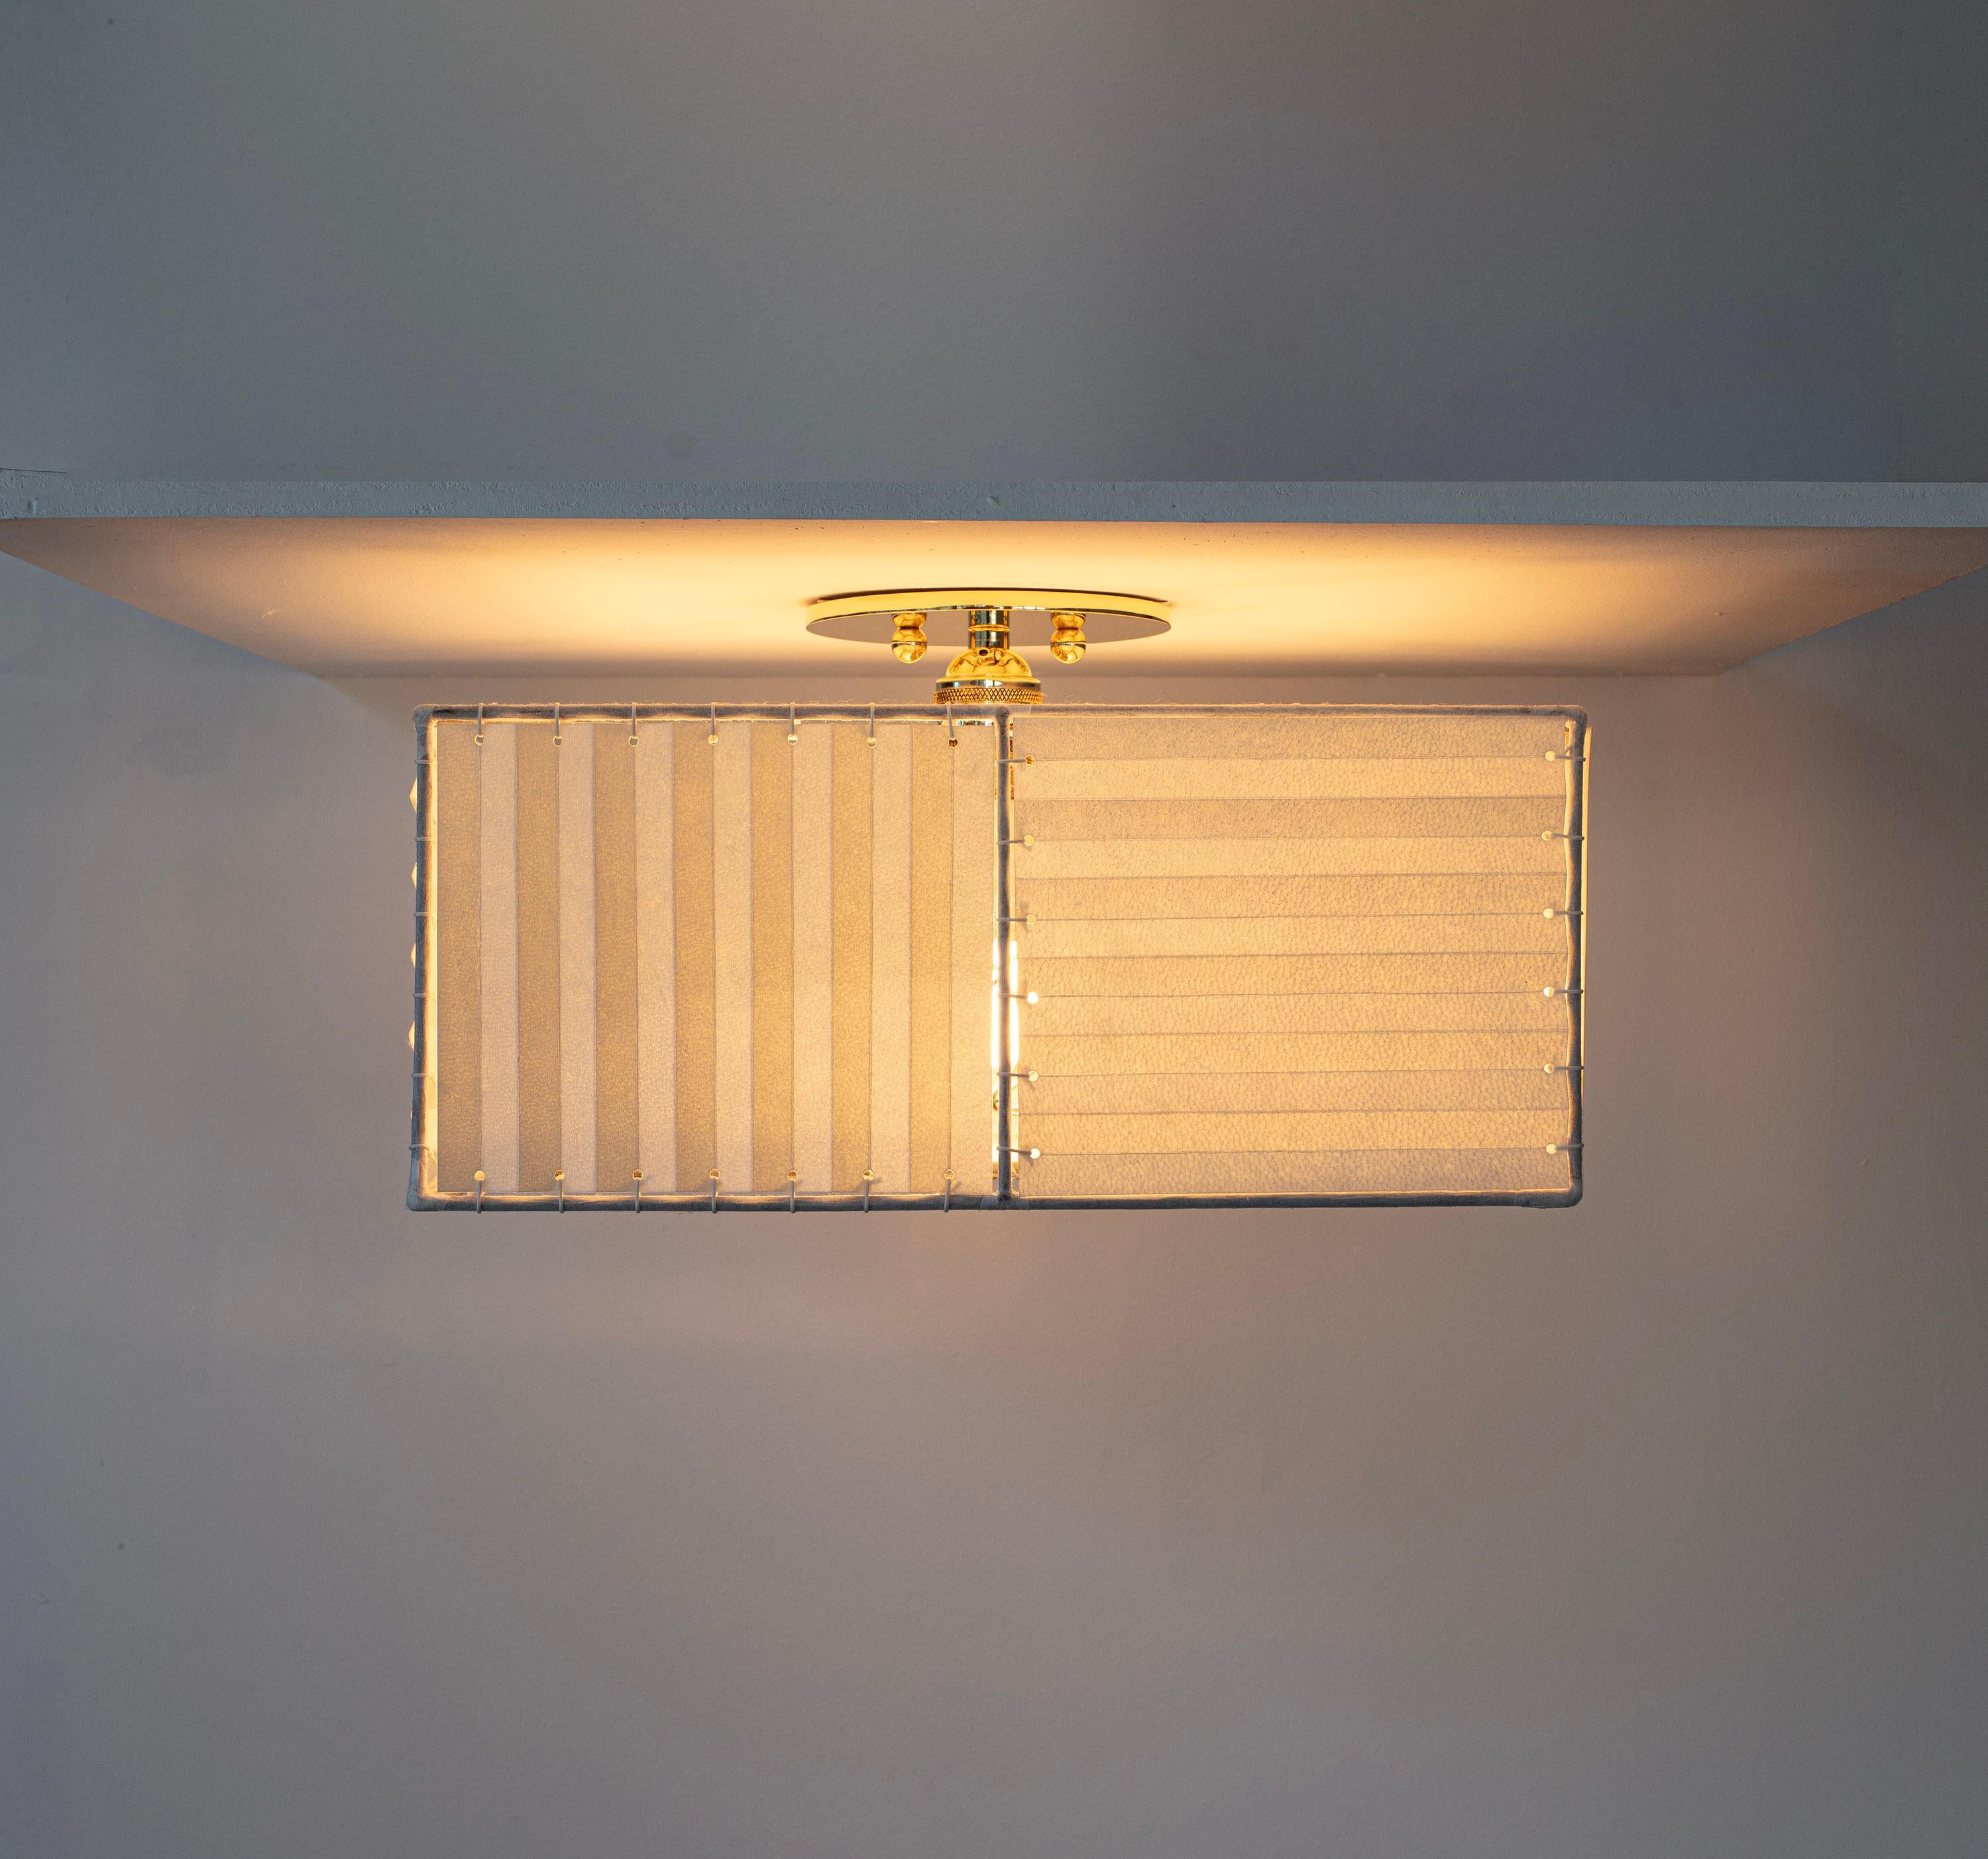 Solid machined brass, hand-stitched accordian folded goatskin parchment shade with diffuser. 

Shades are made from genuine goatskin parchment, hand-selected for each lamp for its natural texture, pattern and color. Reminiscent of the lunar surface,